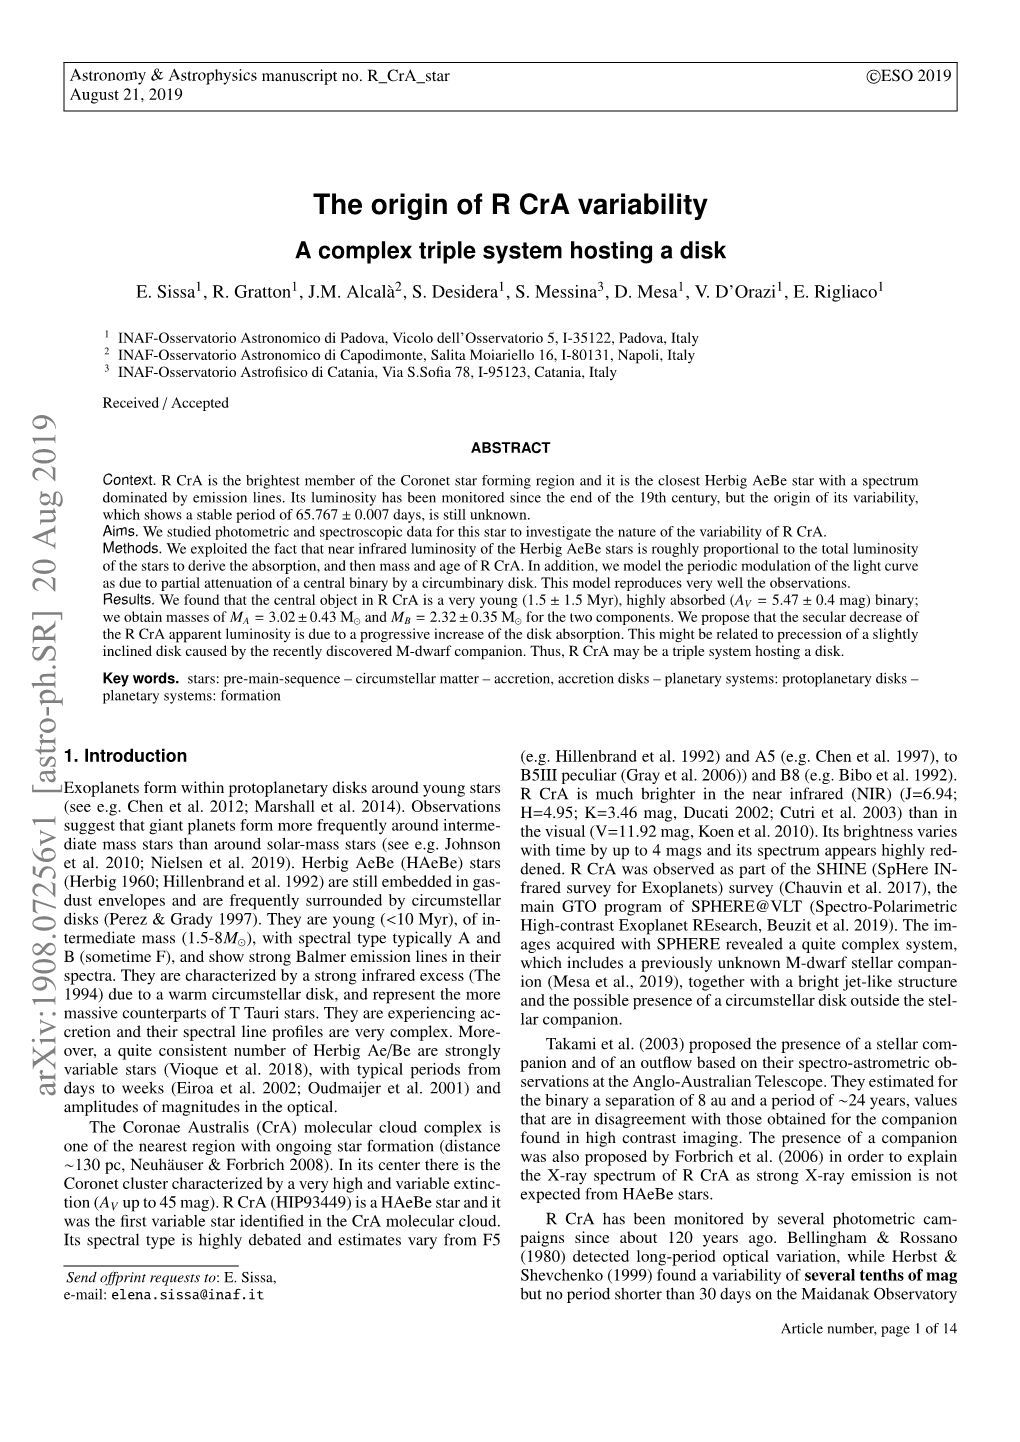 The Origin of R Cra Variability: a Complex Triple System Hosting a Disk